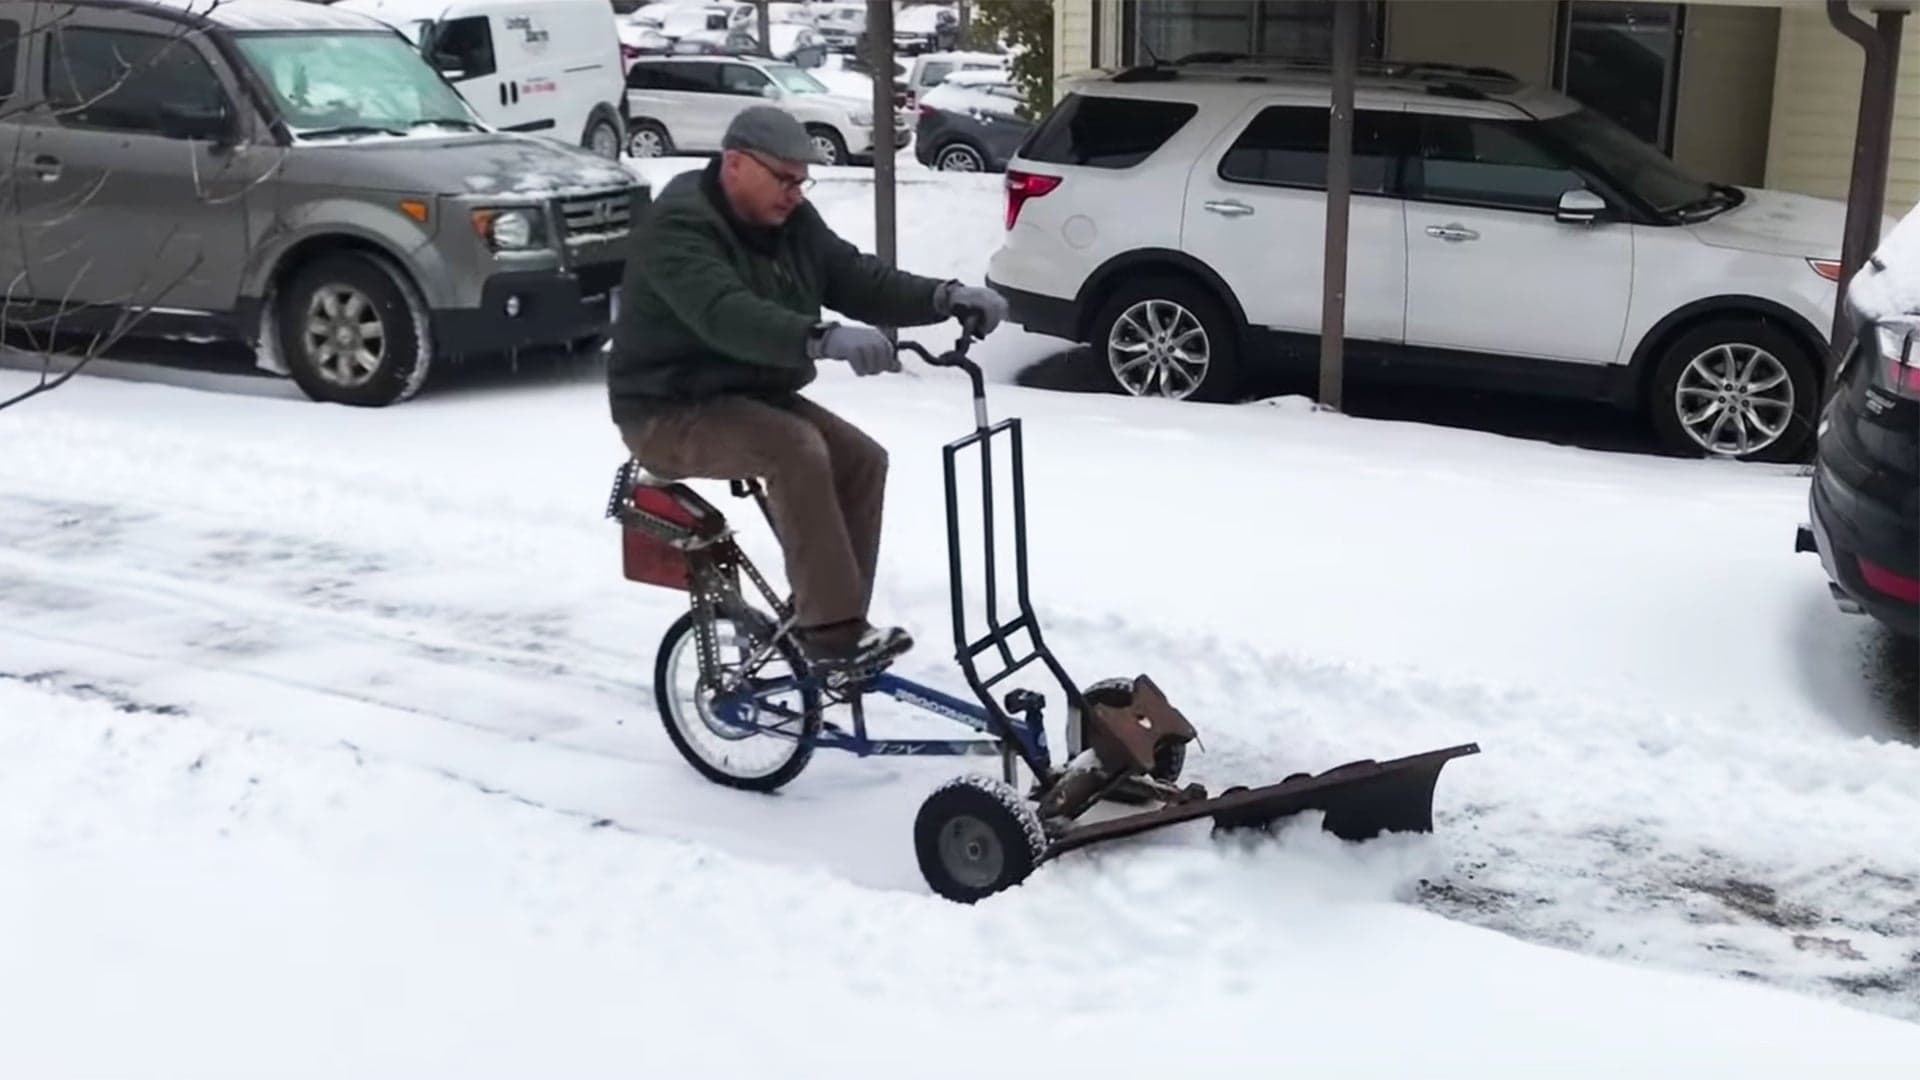 This Homebuilt Bicycle Snowplow Is a Million-Dollar Idea